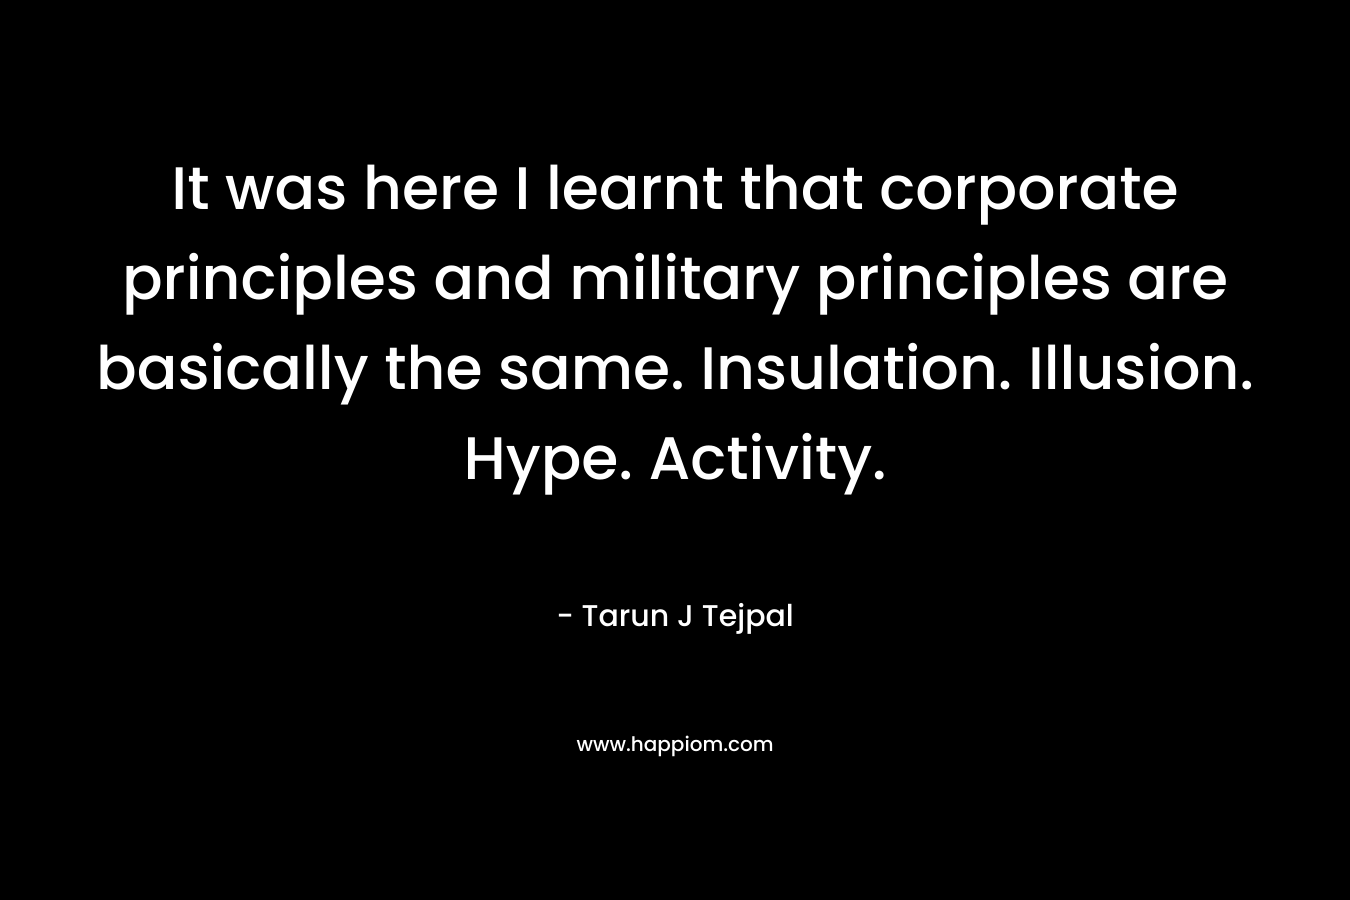 It was here I learnt that corporate principles and military principles are basically the same. Insulation. Illusion. Hype. Activity.